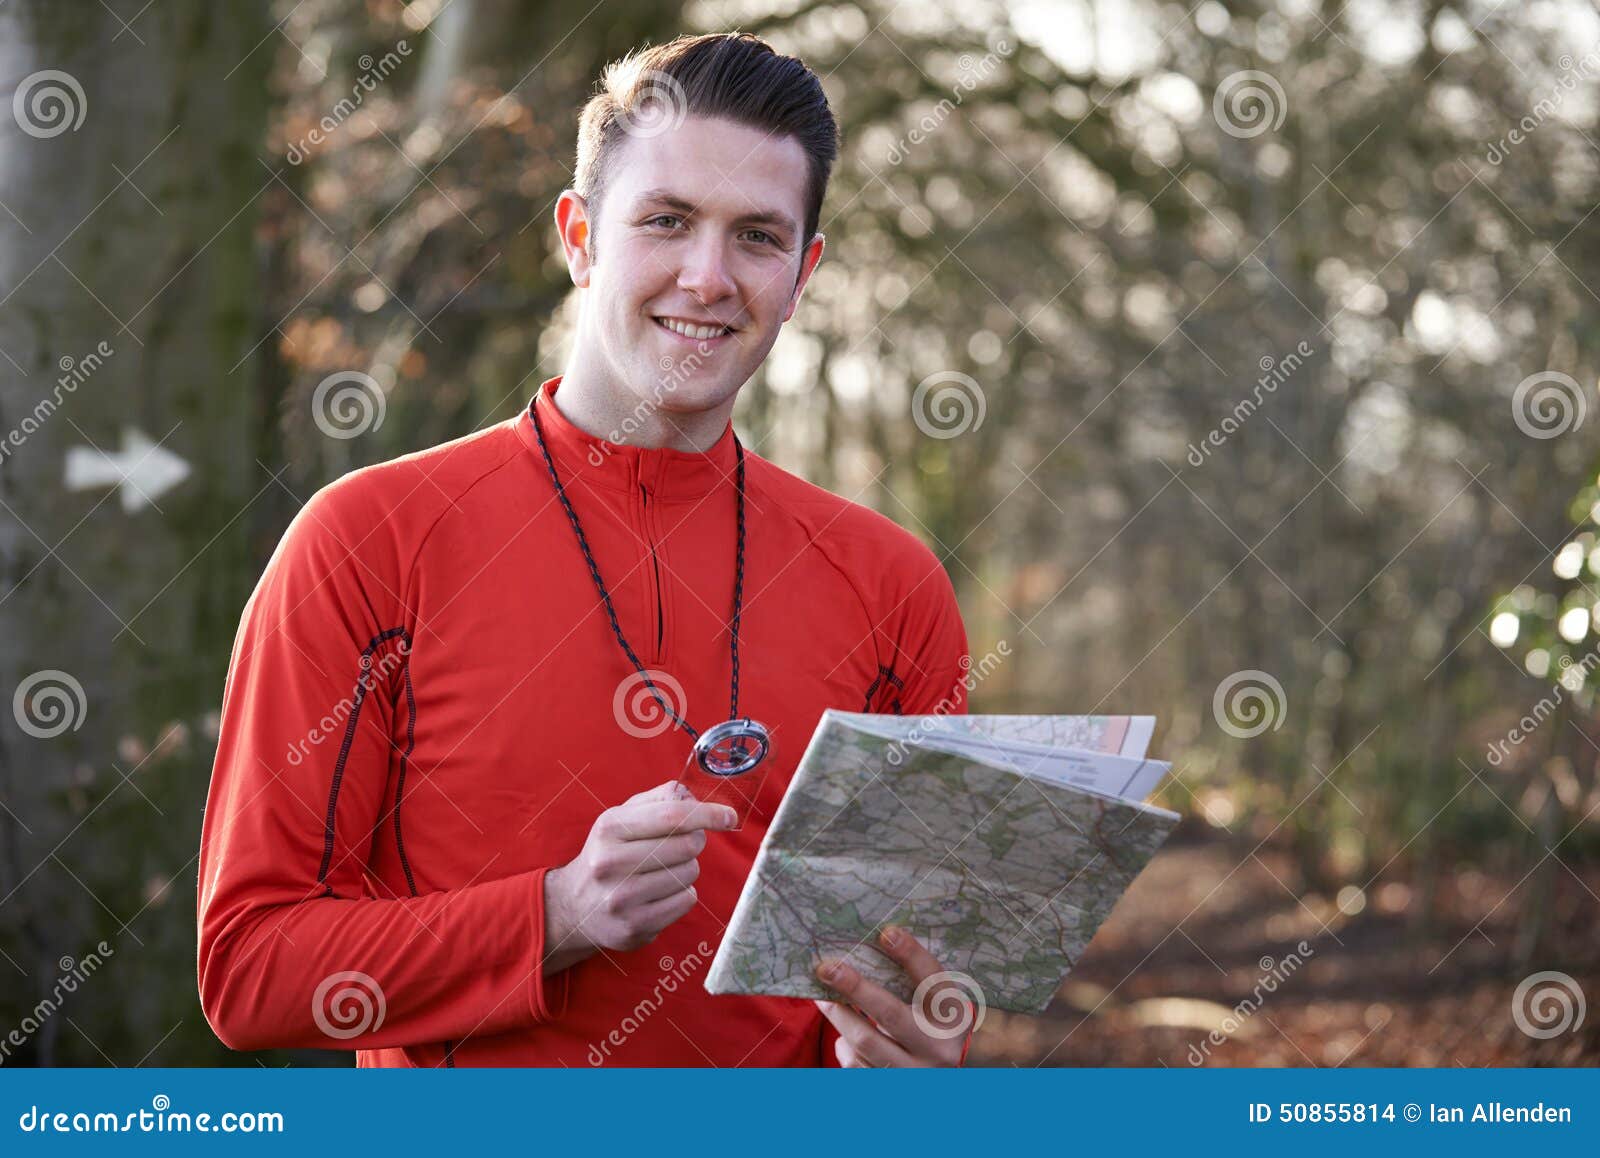 man orienteering in woodlands with map and compass